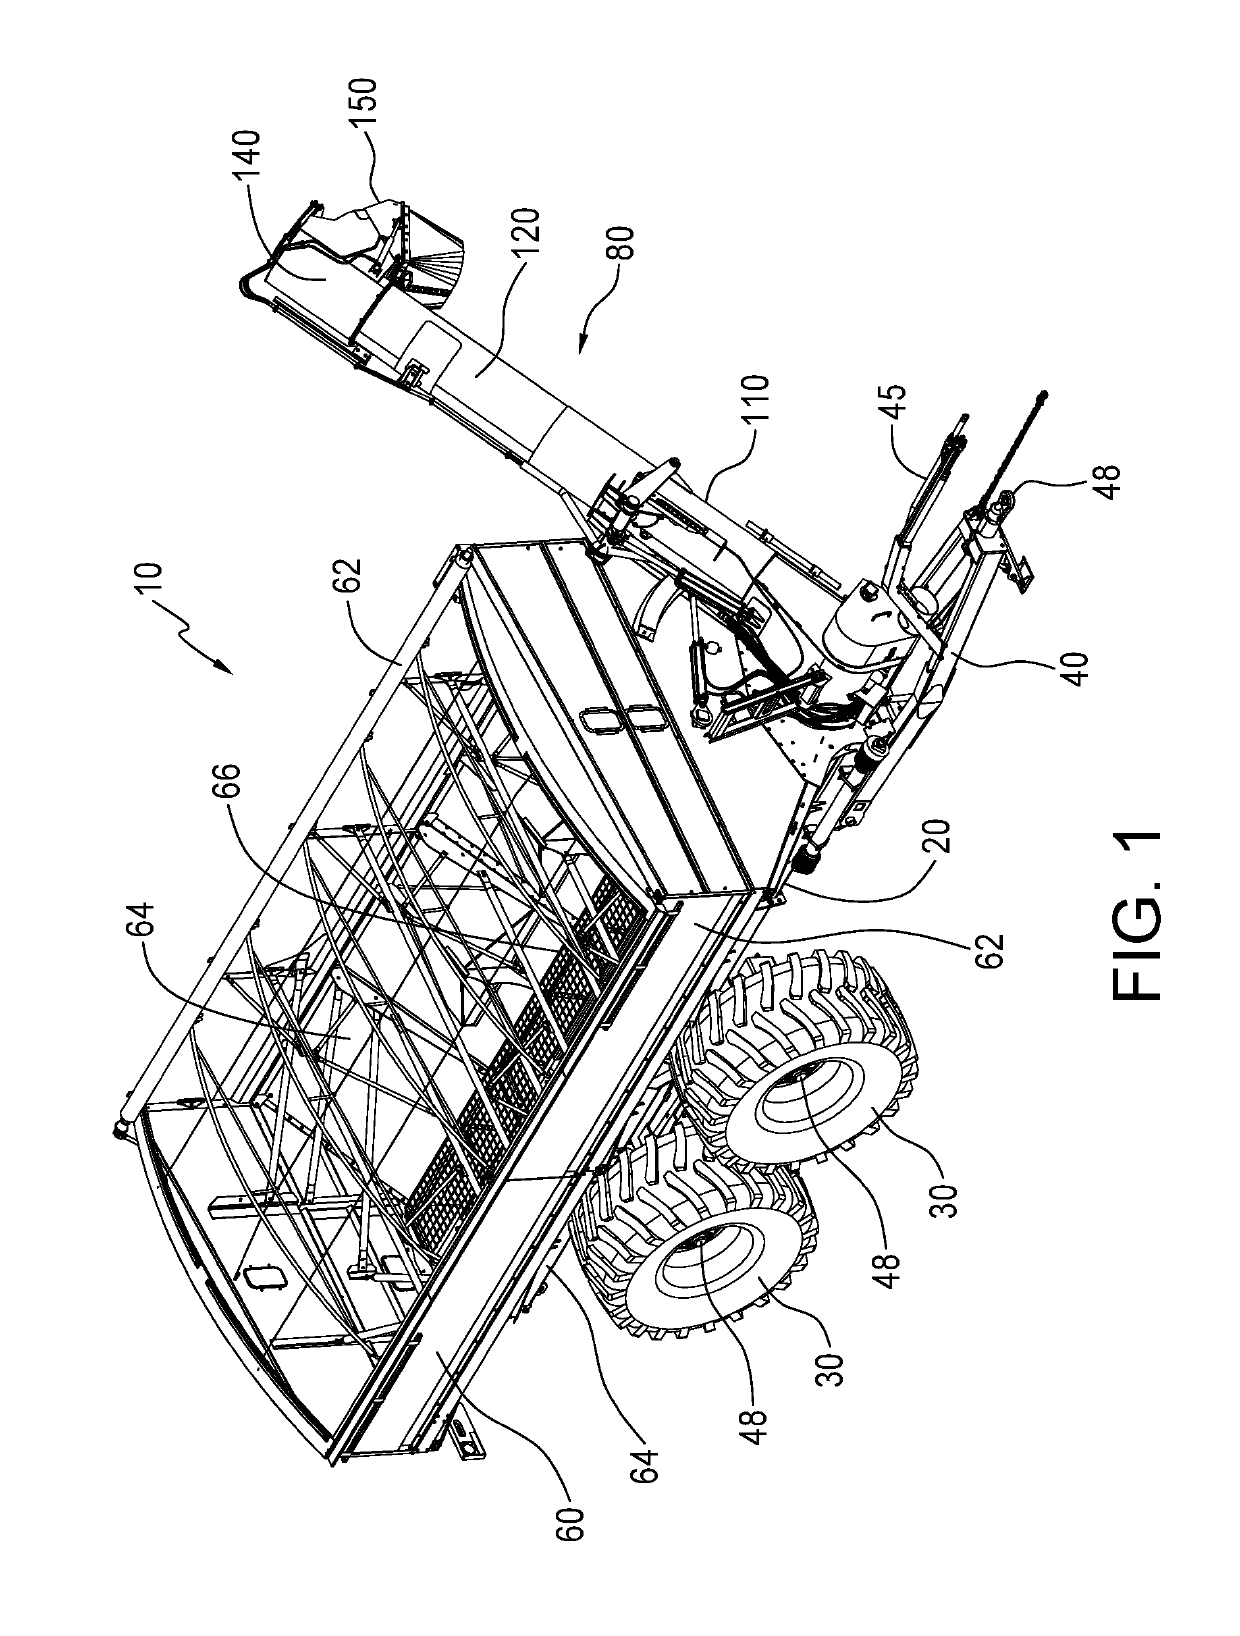 Grain cart with automatic unloading of a predetermined weight of crop material